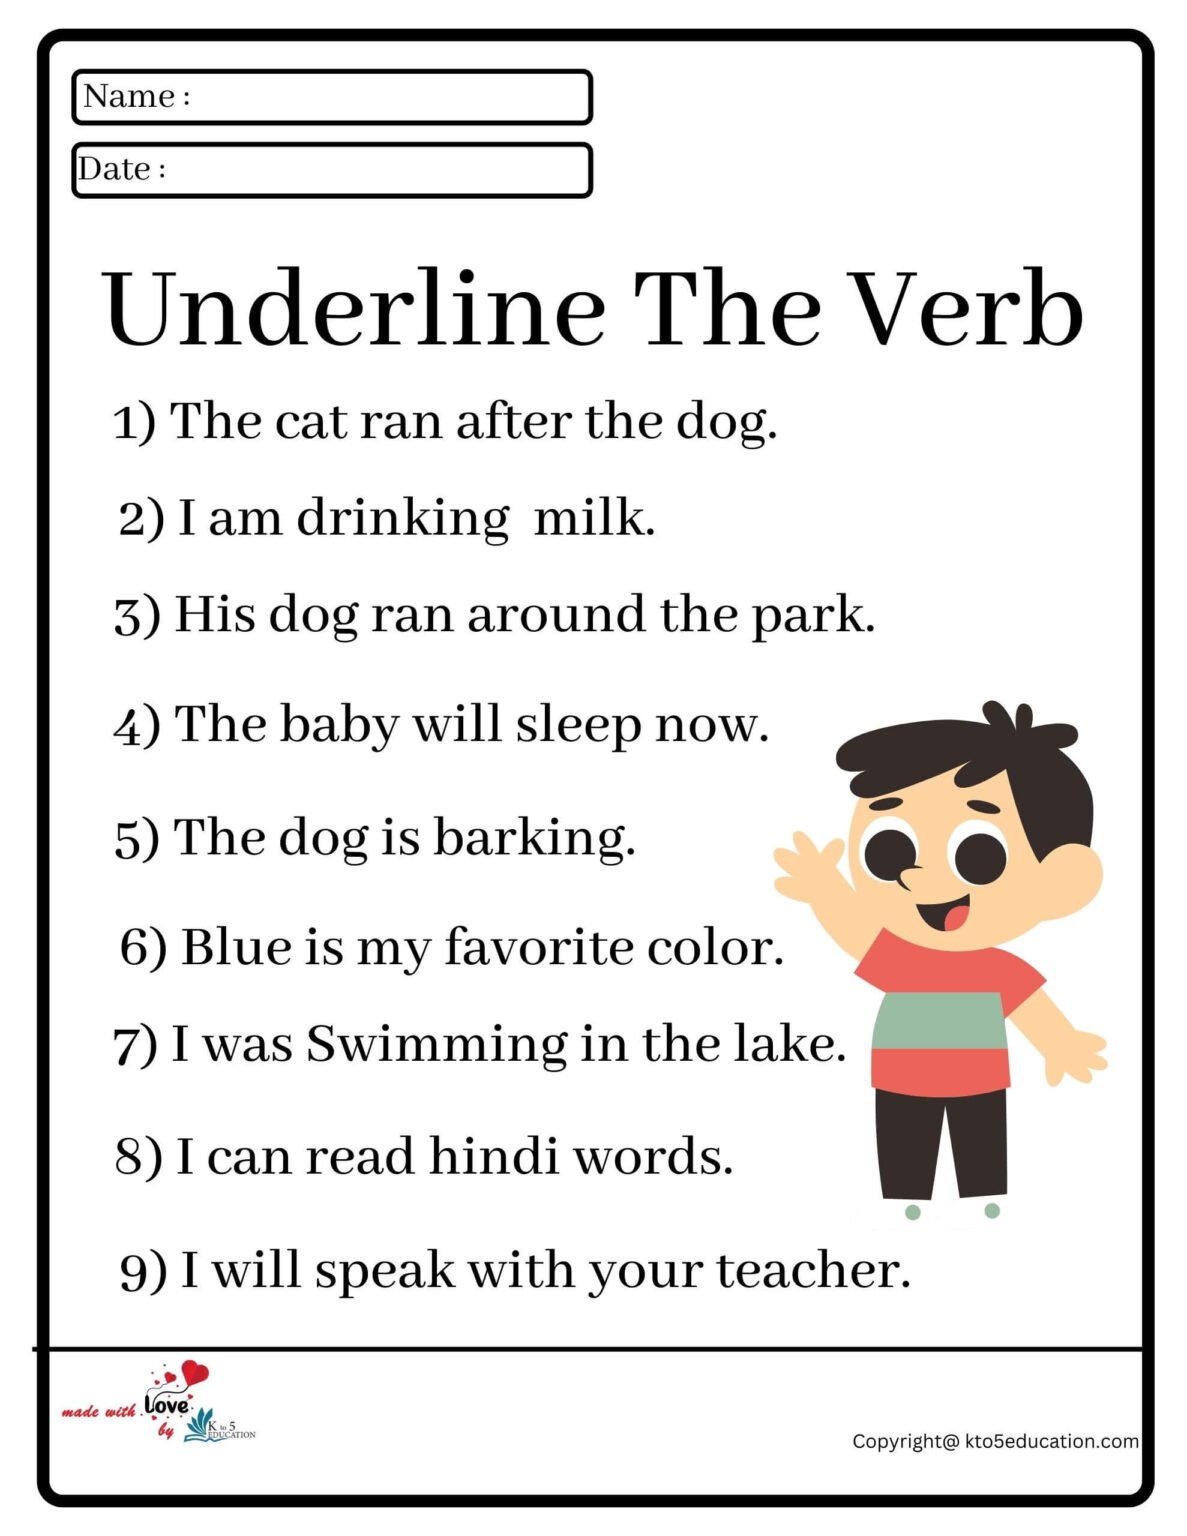 underline-the-pronouns-in-the-following-sentences-and-write-their-types